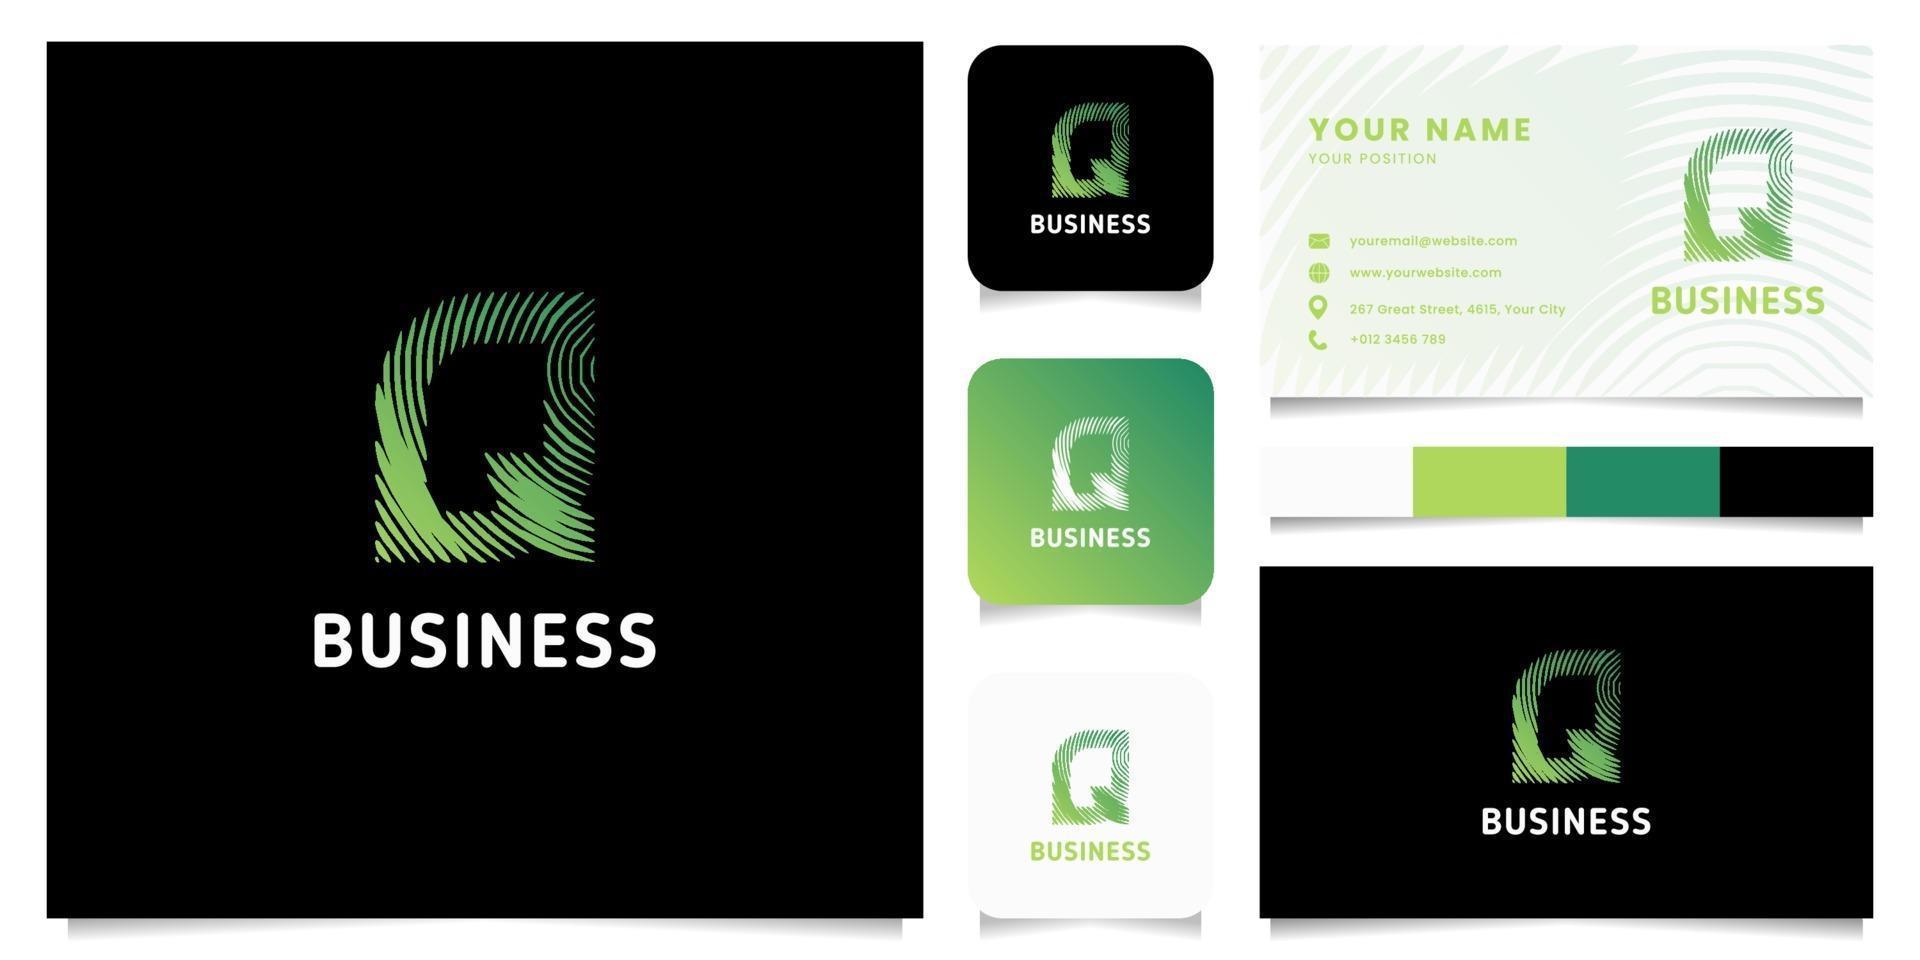 Colorful Green Gradient Circular Lines Letter Q Logo with Business Card Template vector